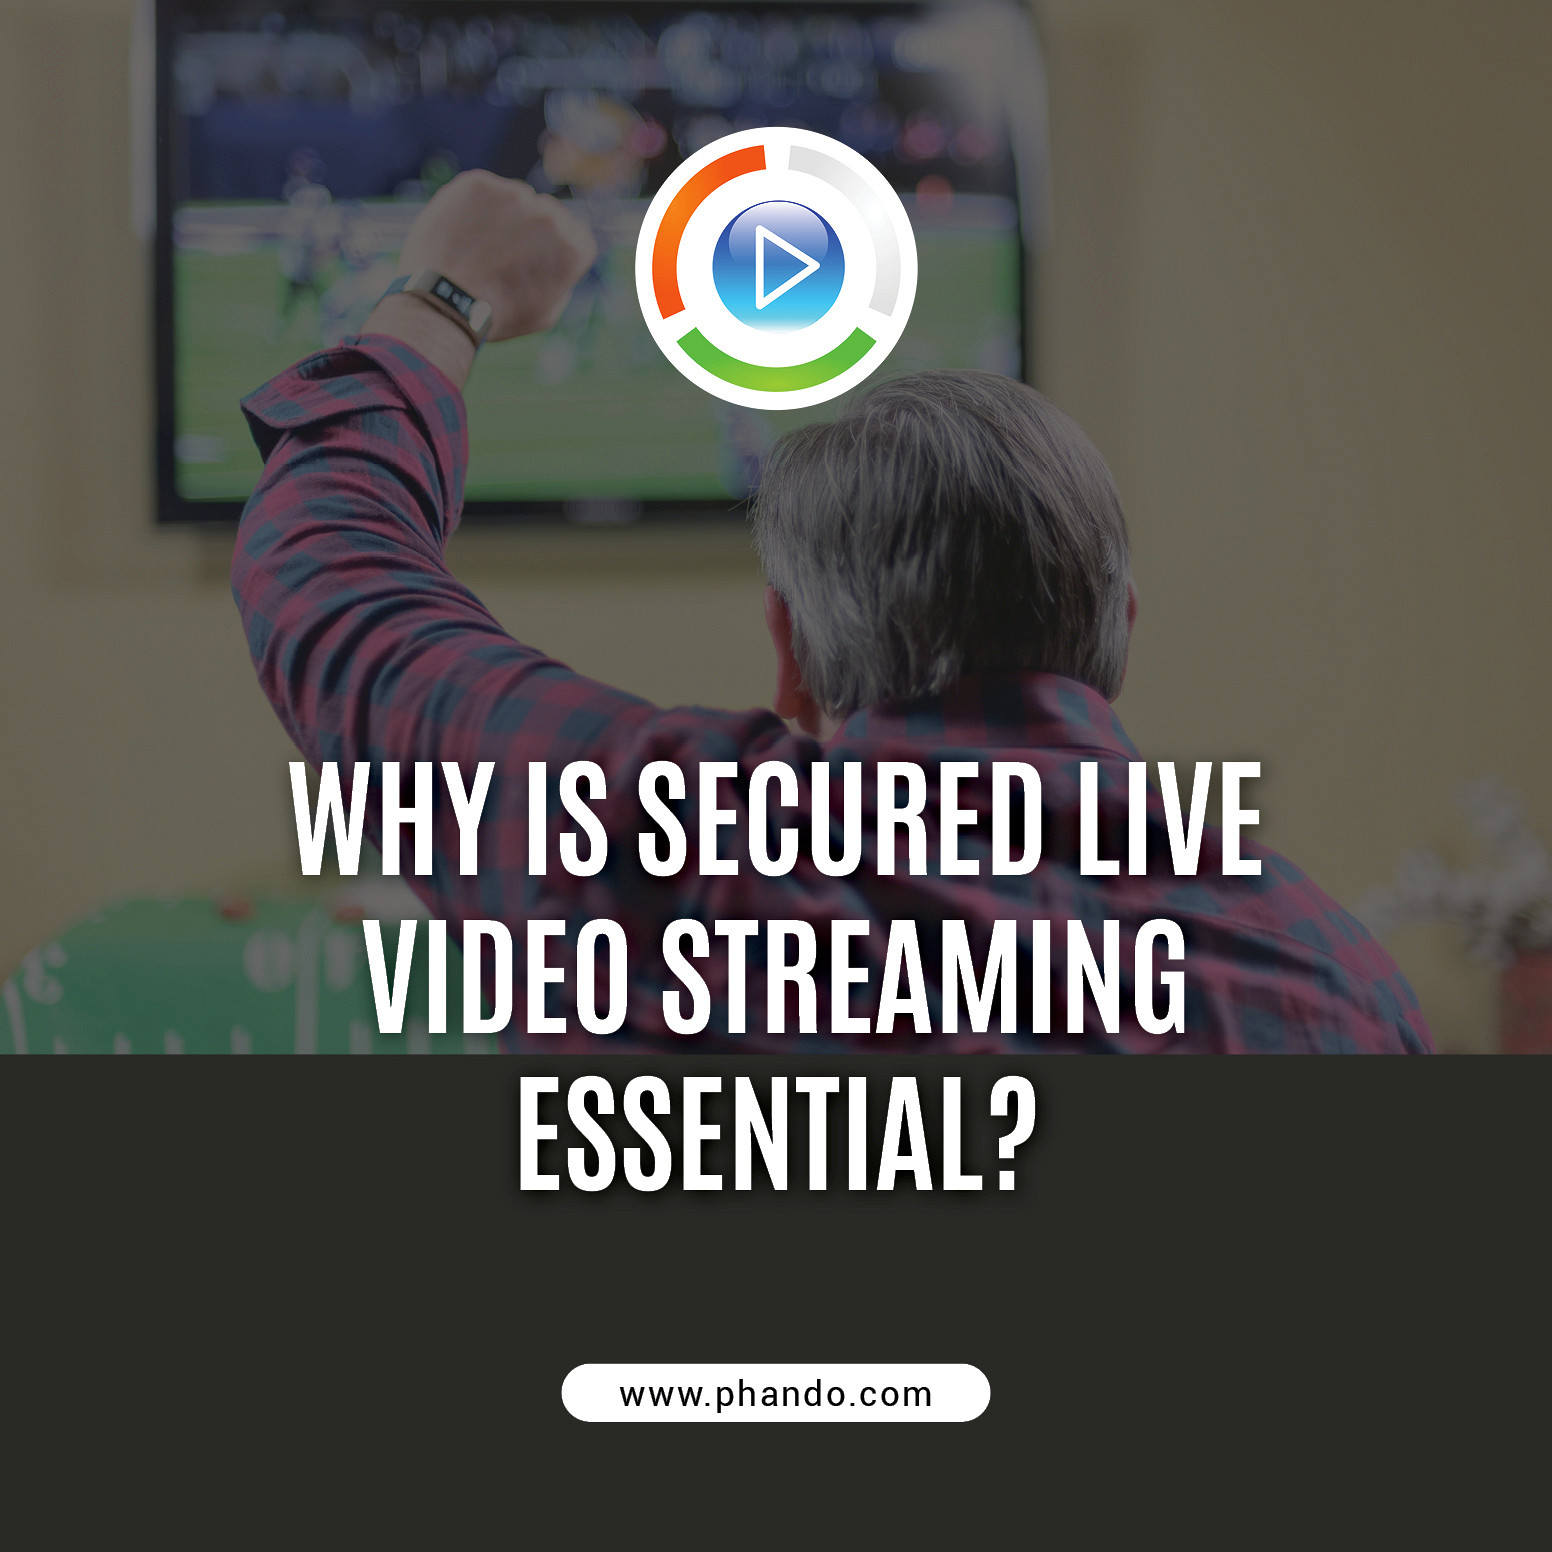 Why Is Secured Live Video Streaming Essential?